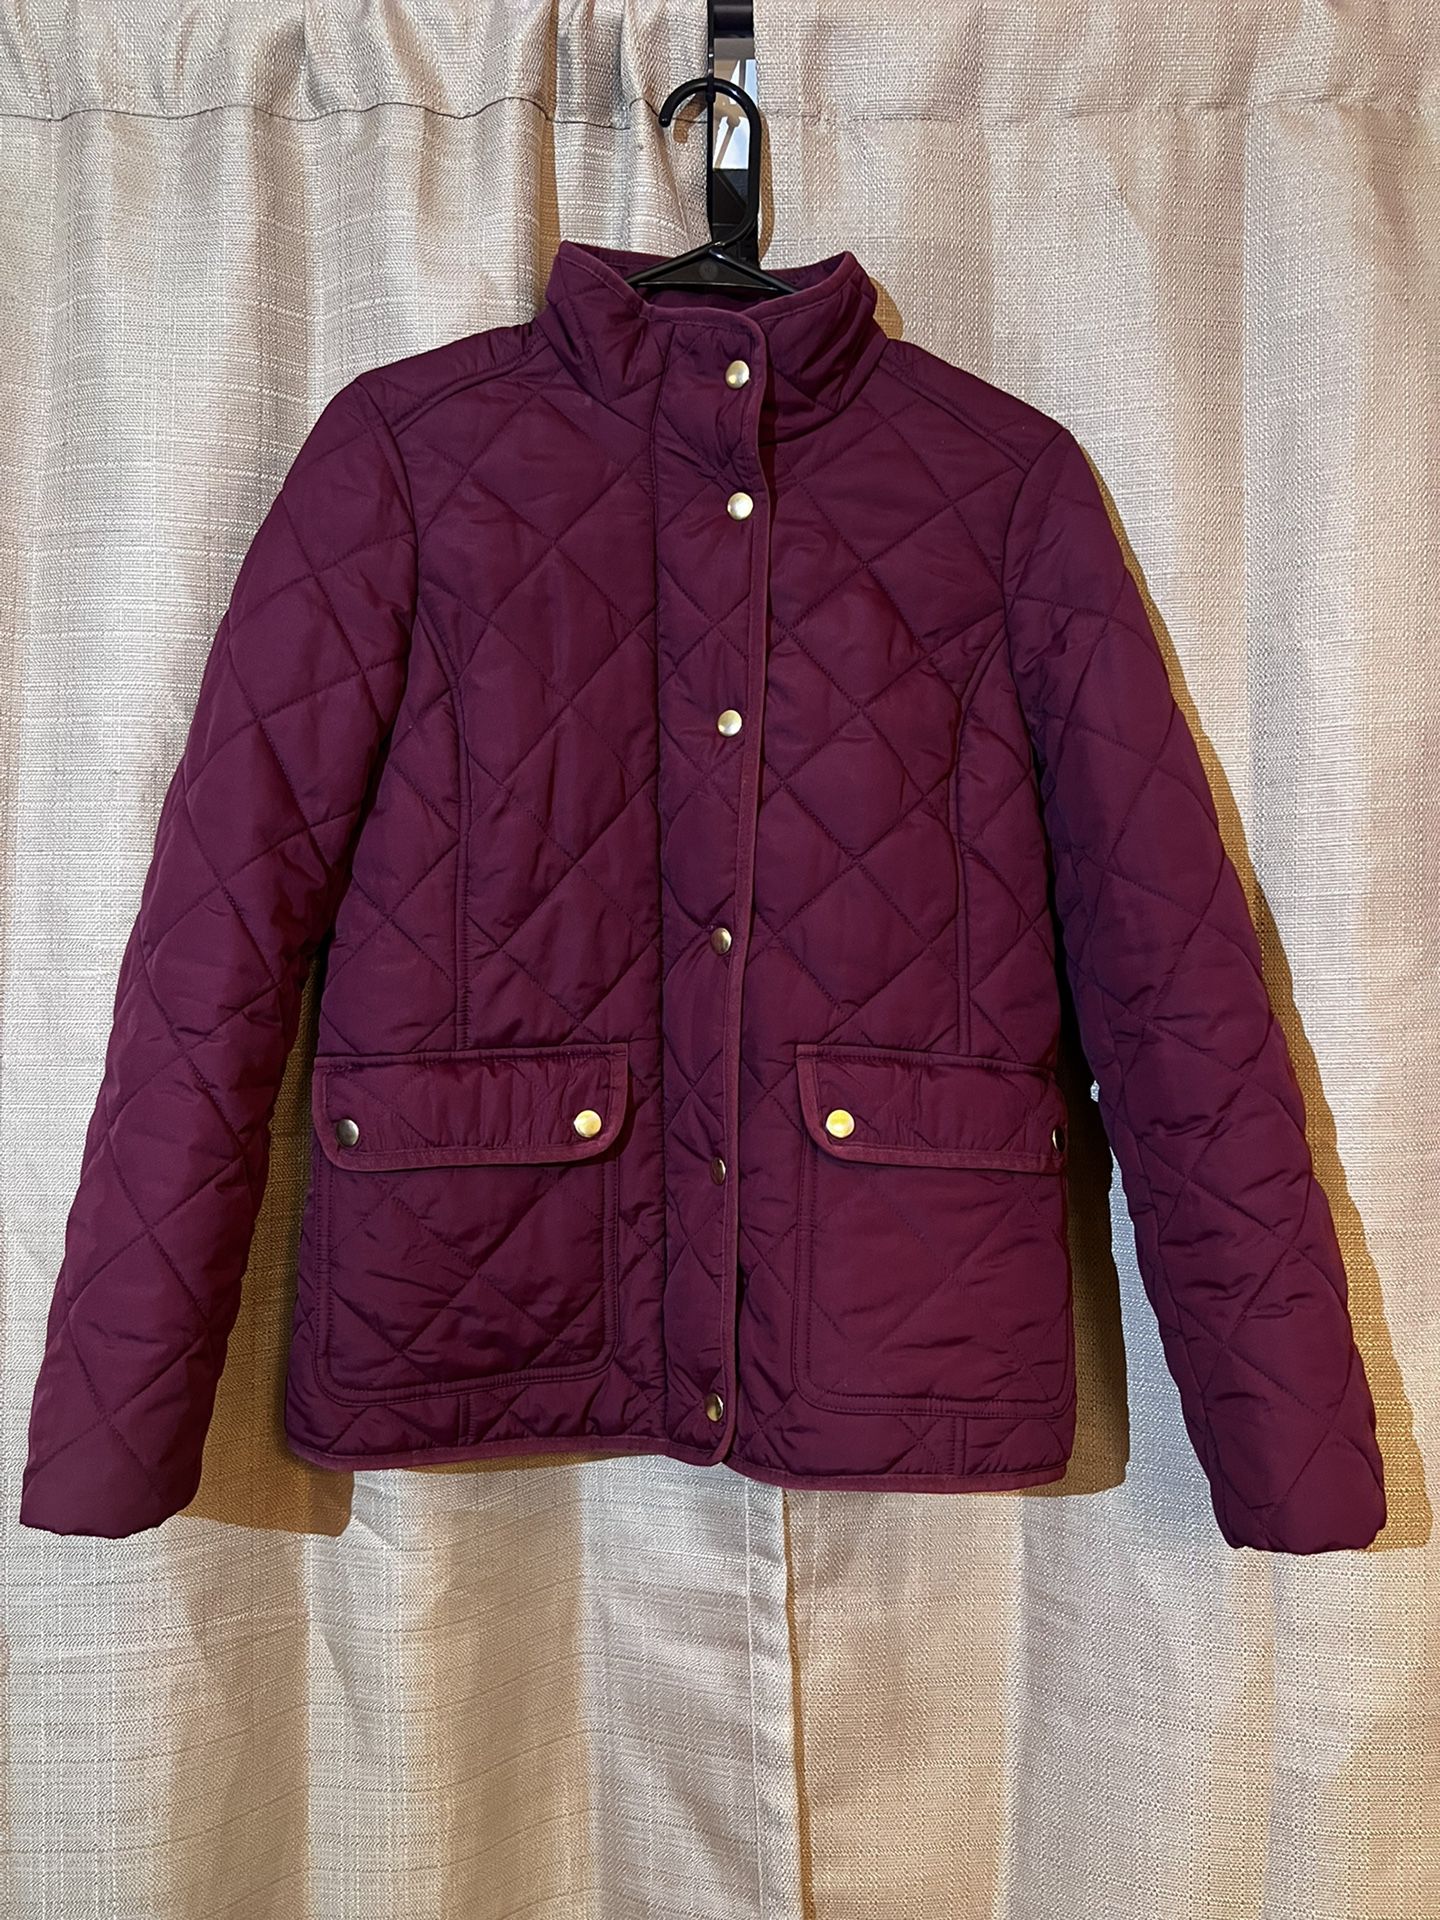 J.Crew Quilted Jacket